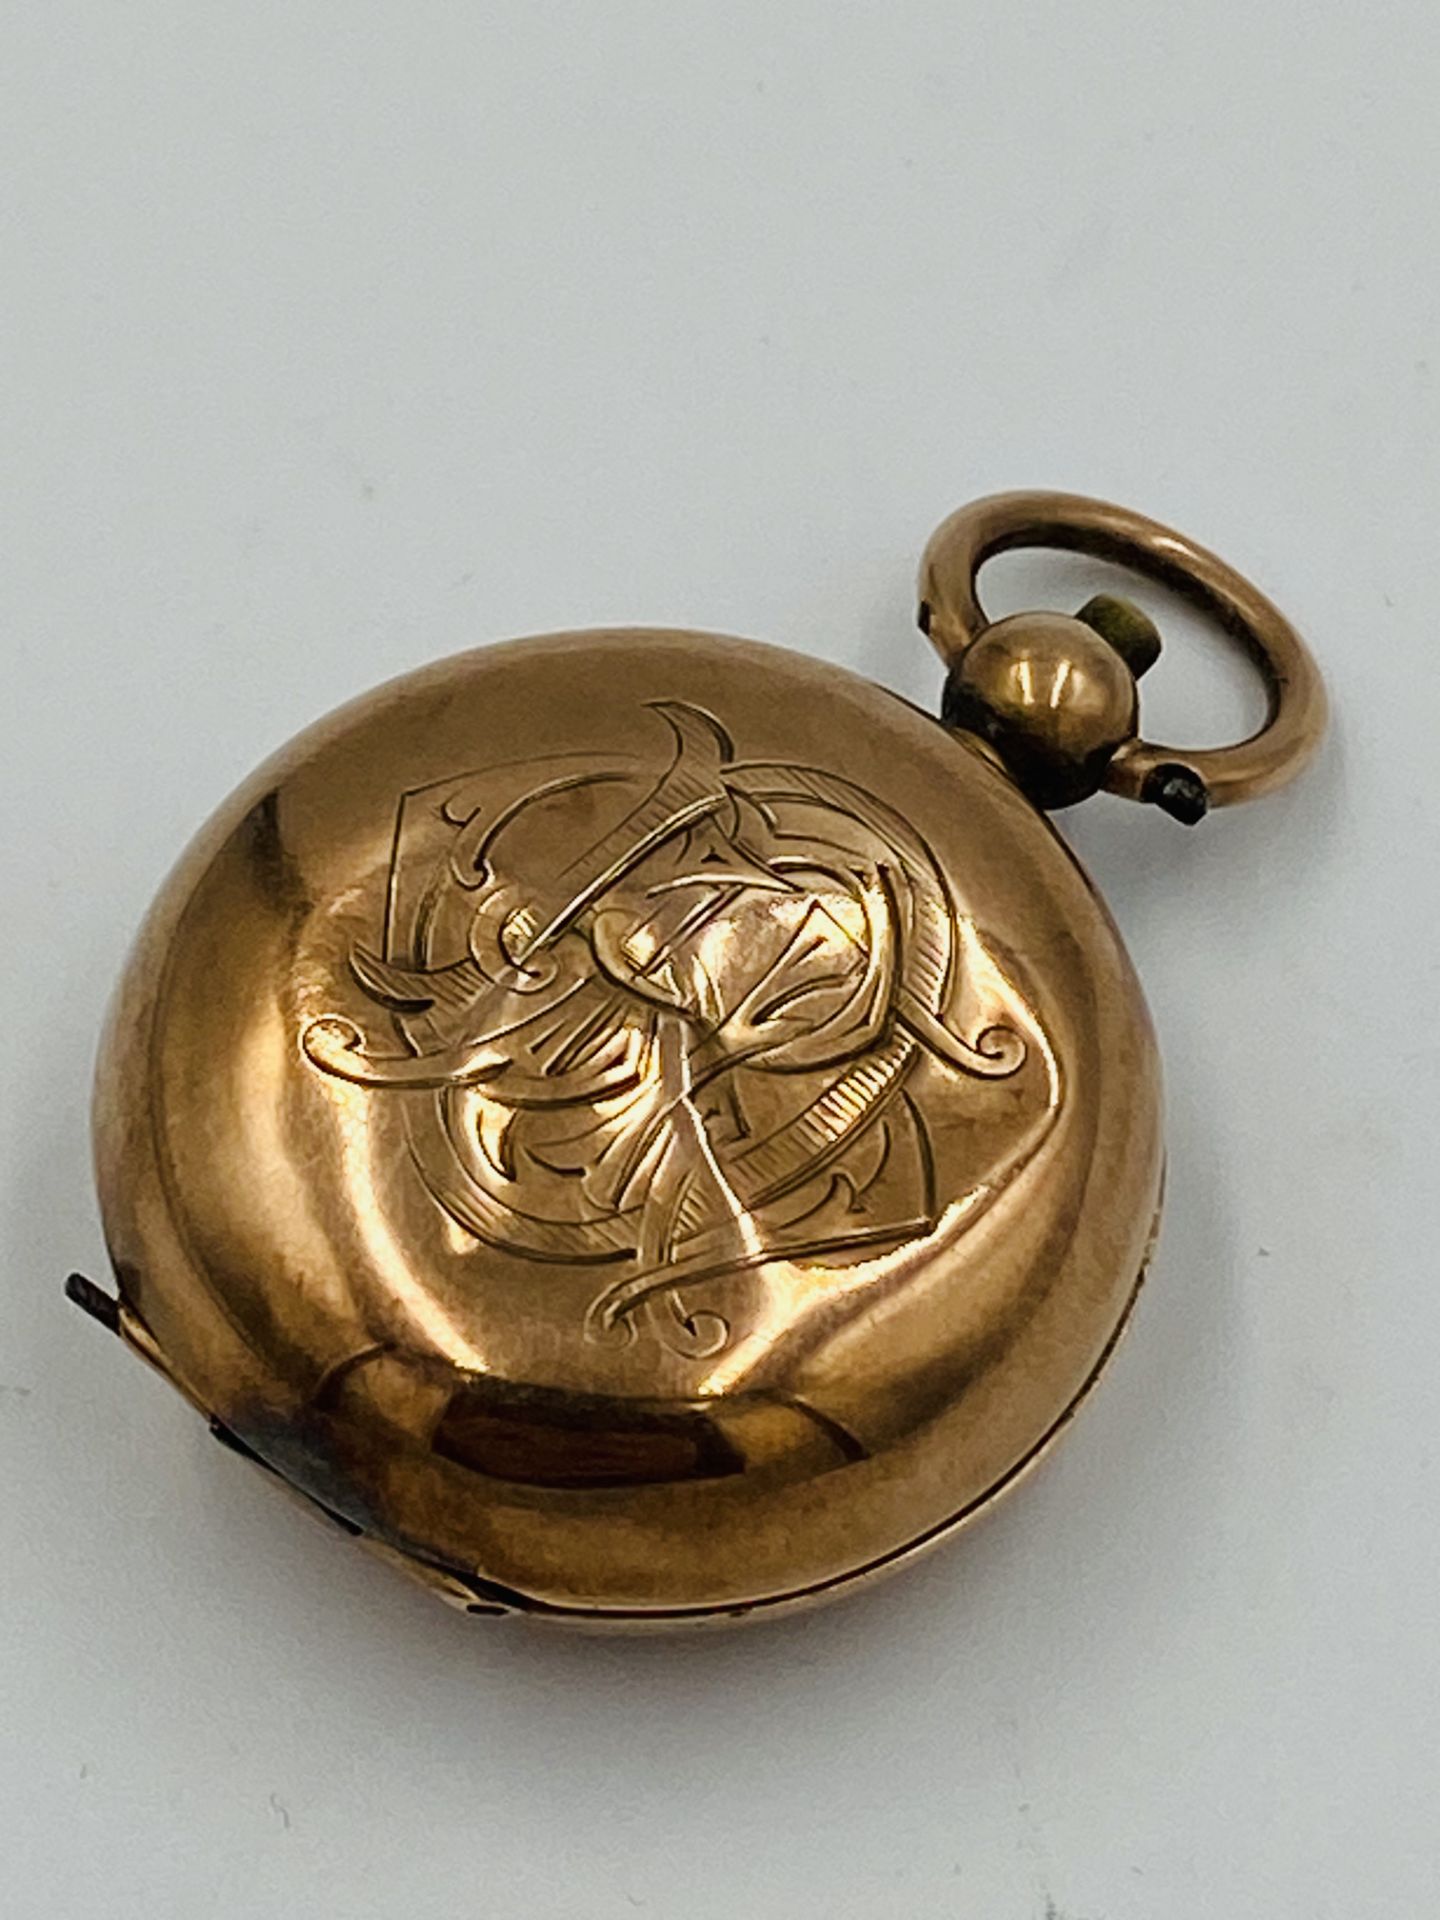 9ct gold coin holder, Birmingham 1899 - Image 4 of 4